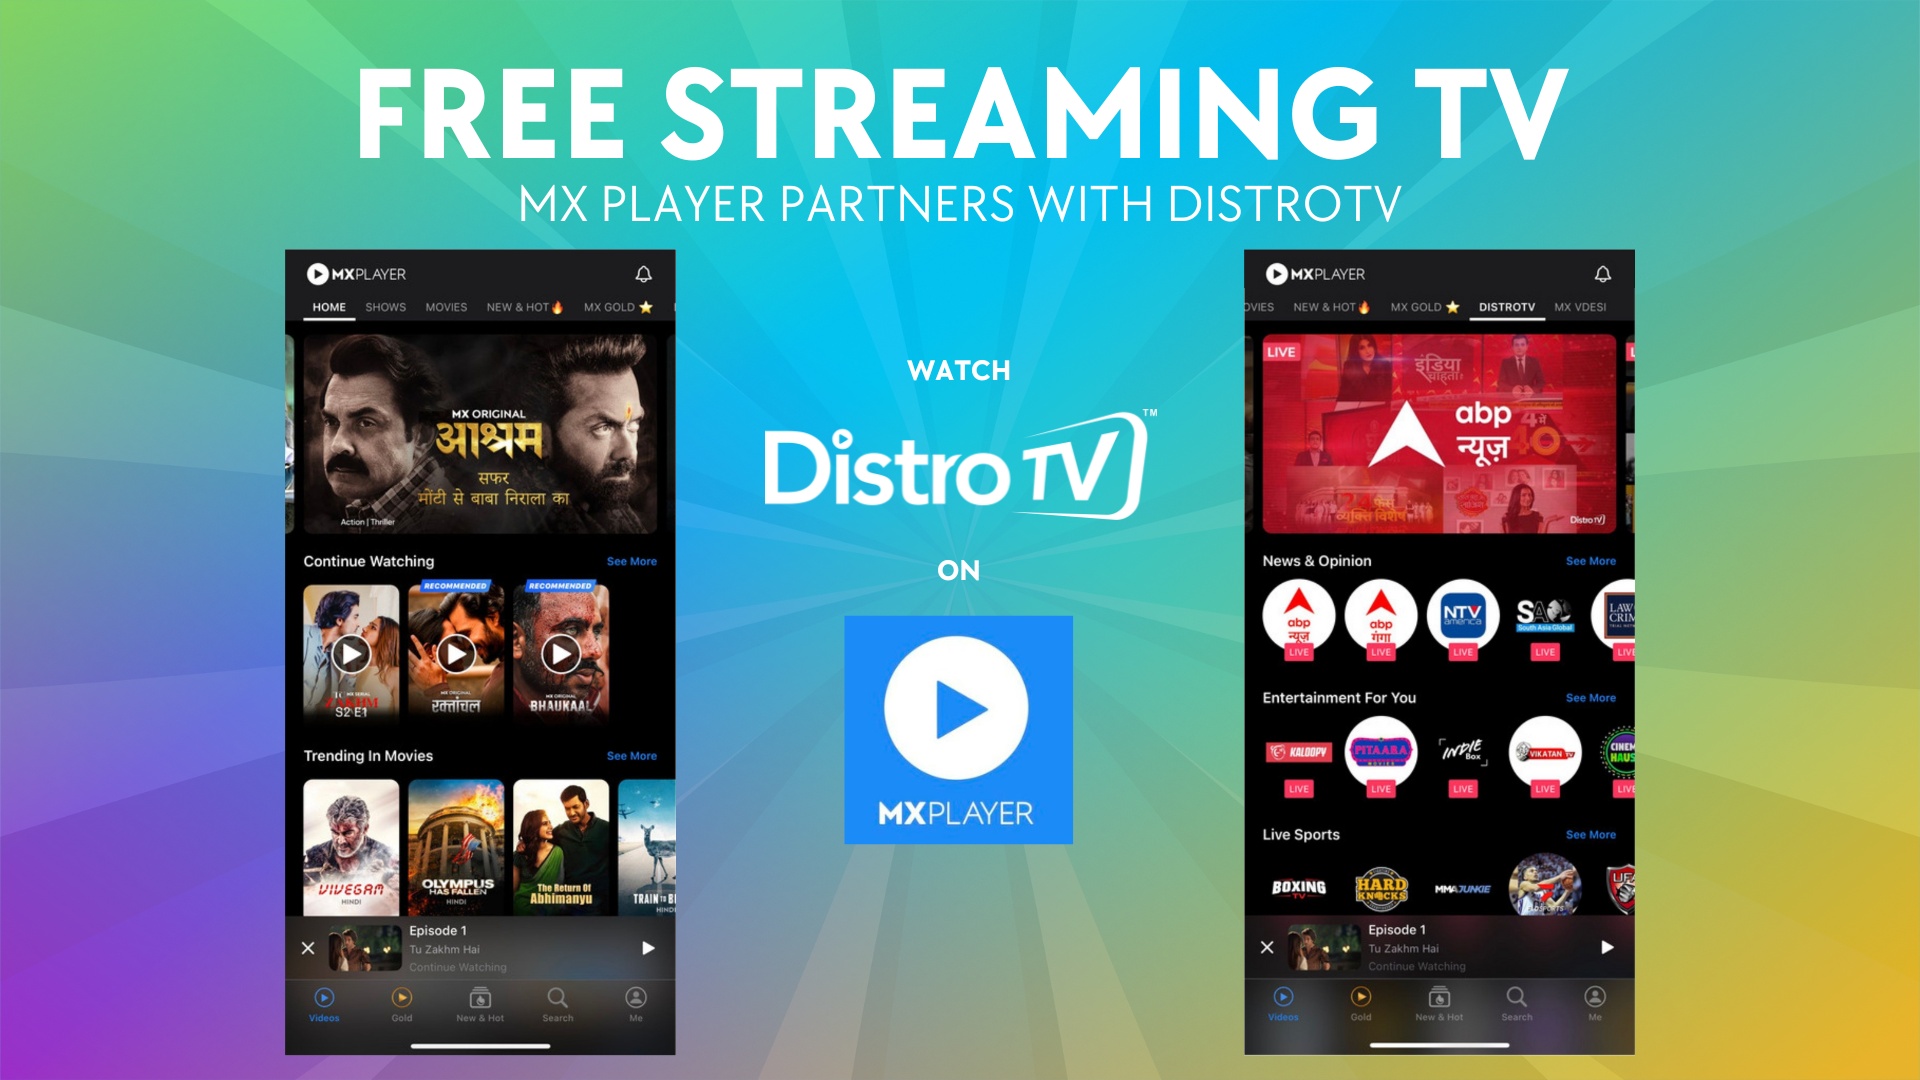 MX Player and DistroTV partner to build Indias largest Live TV Streaming Service